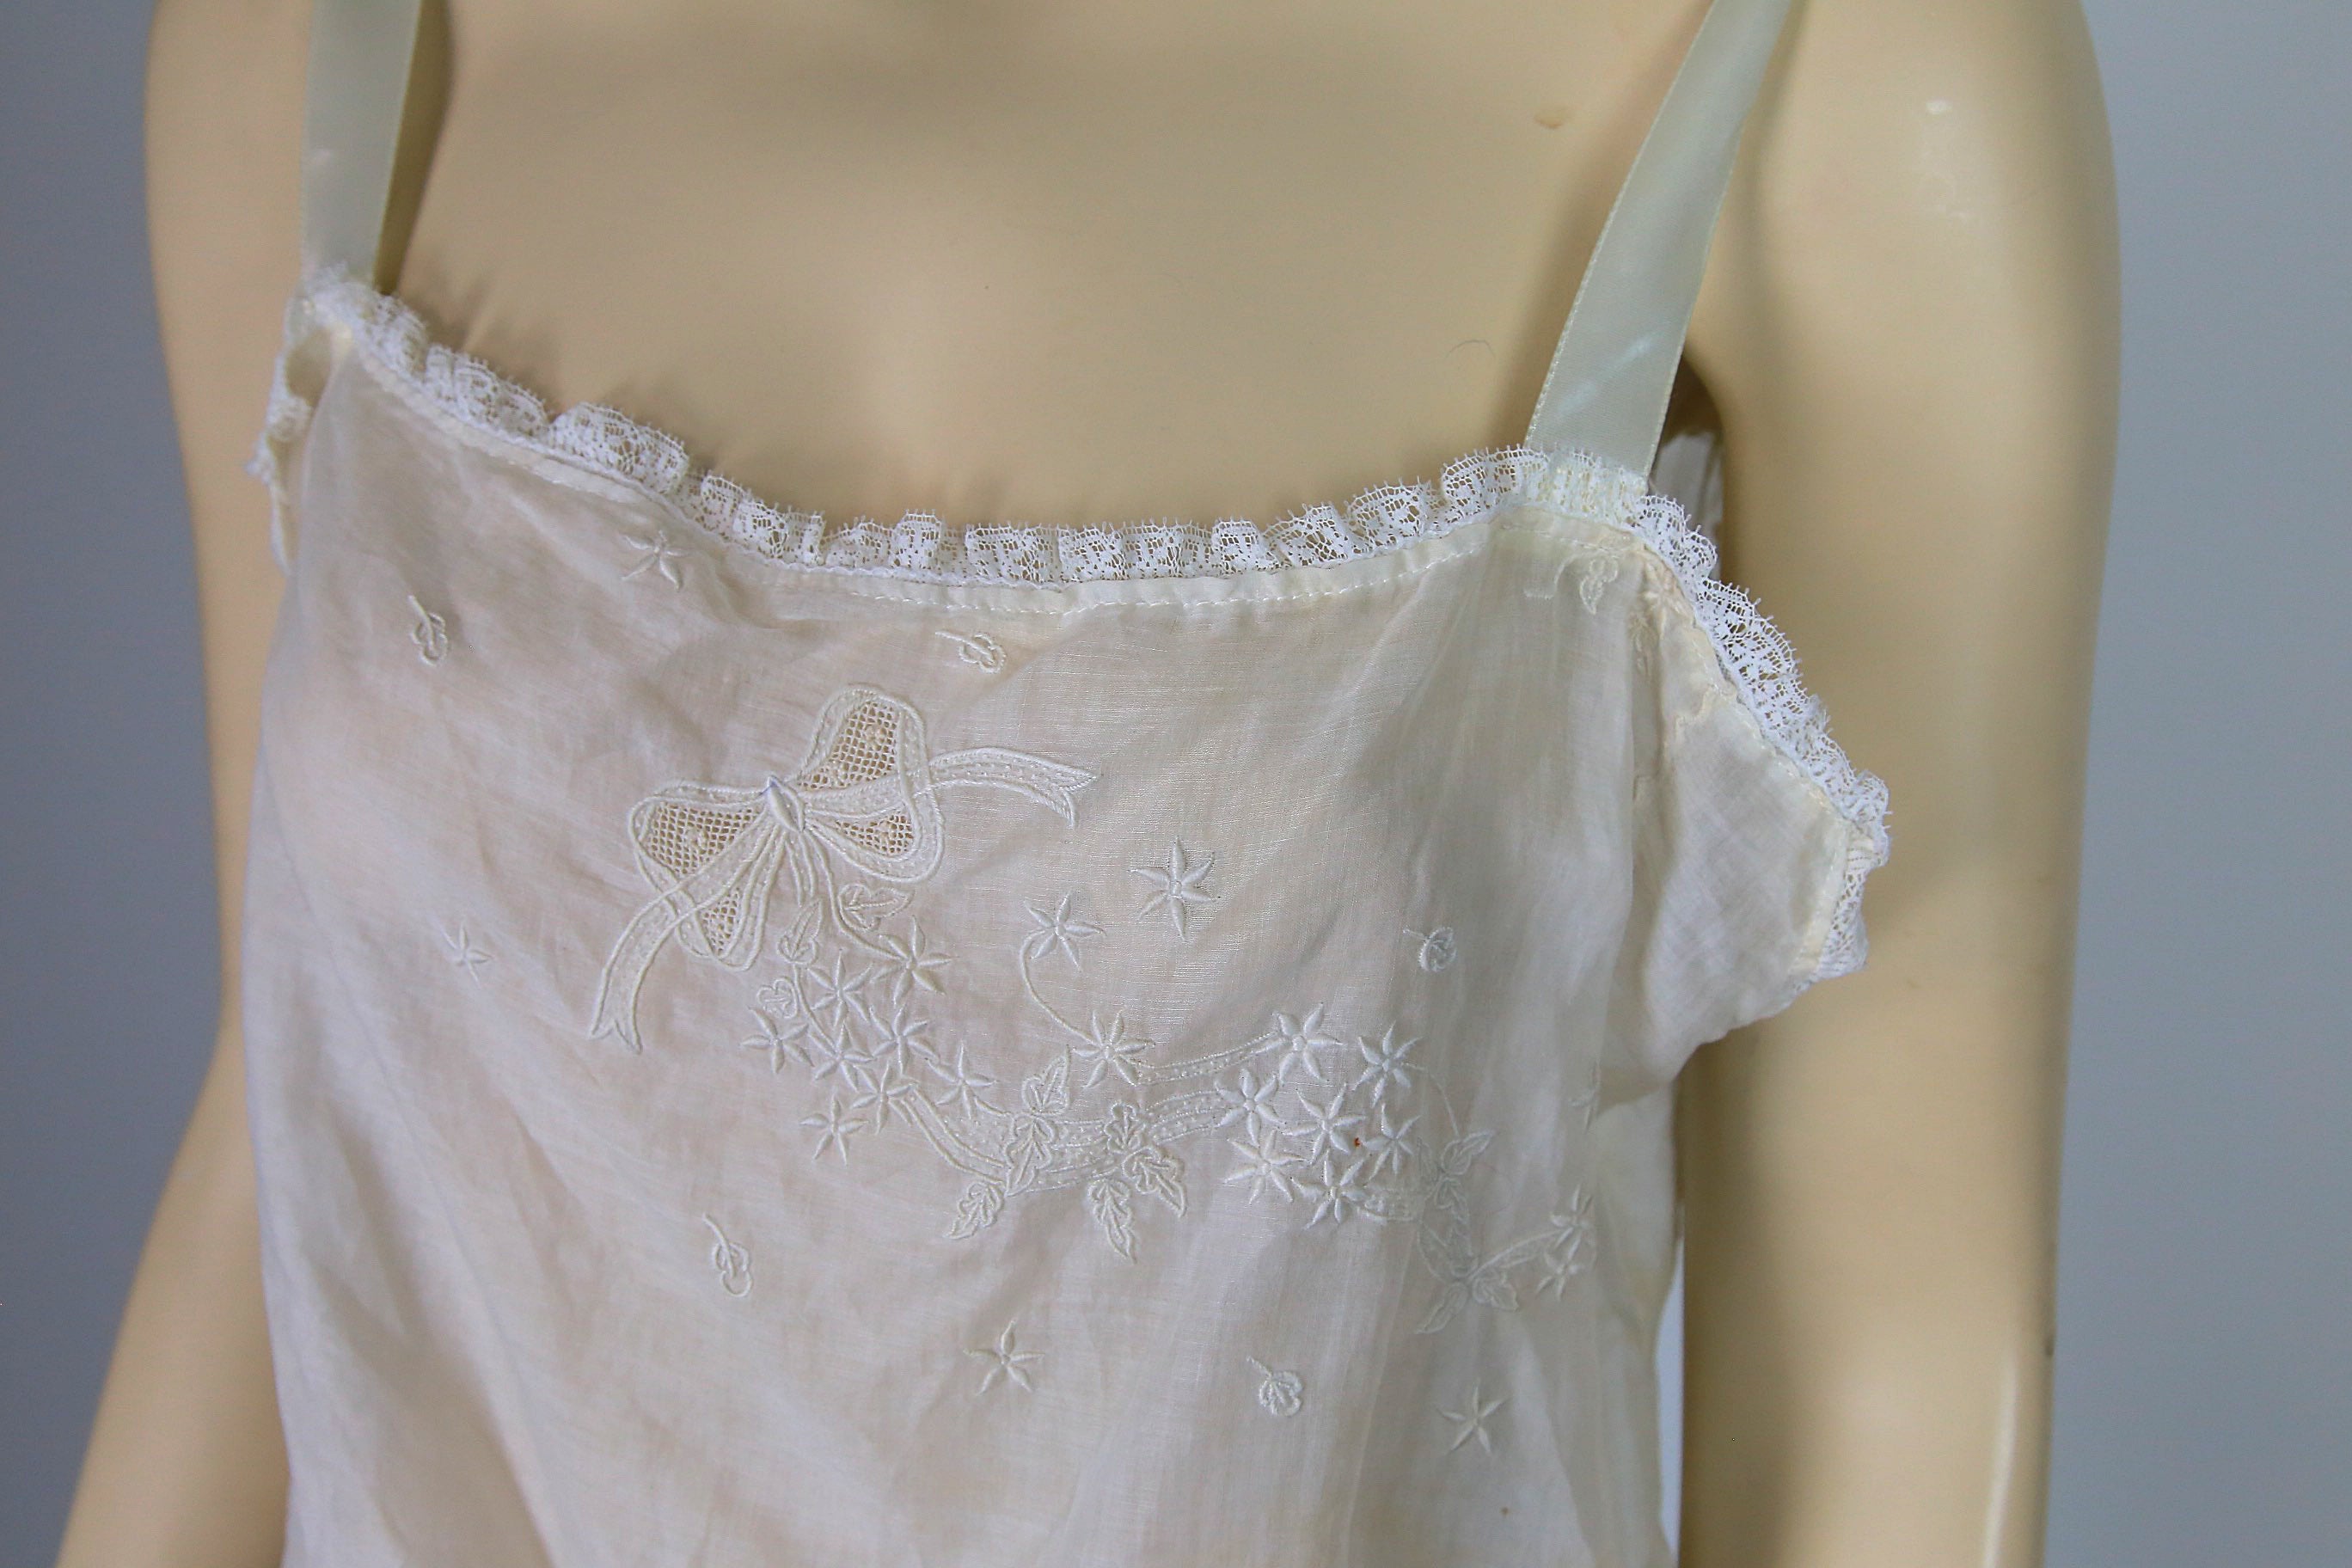 Antique Victorian embroidered chemise corset cover